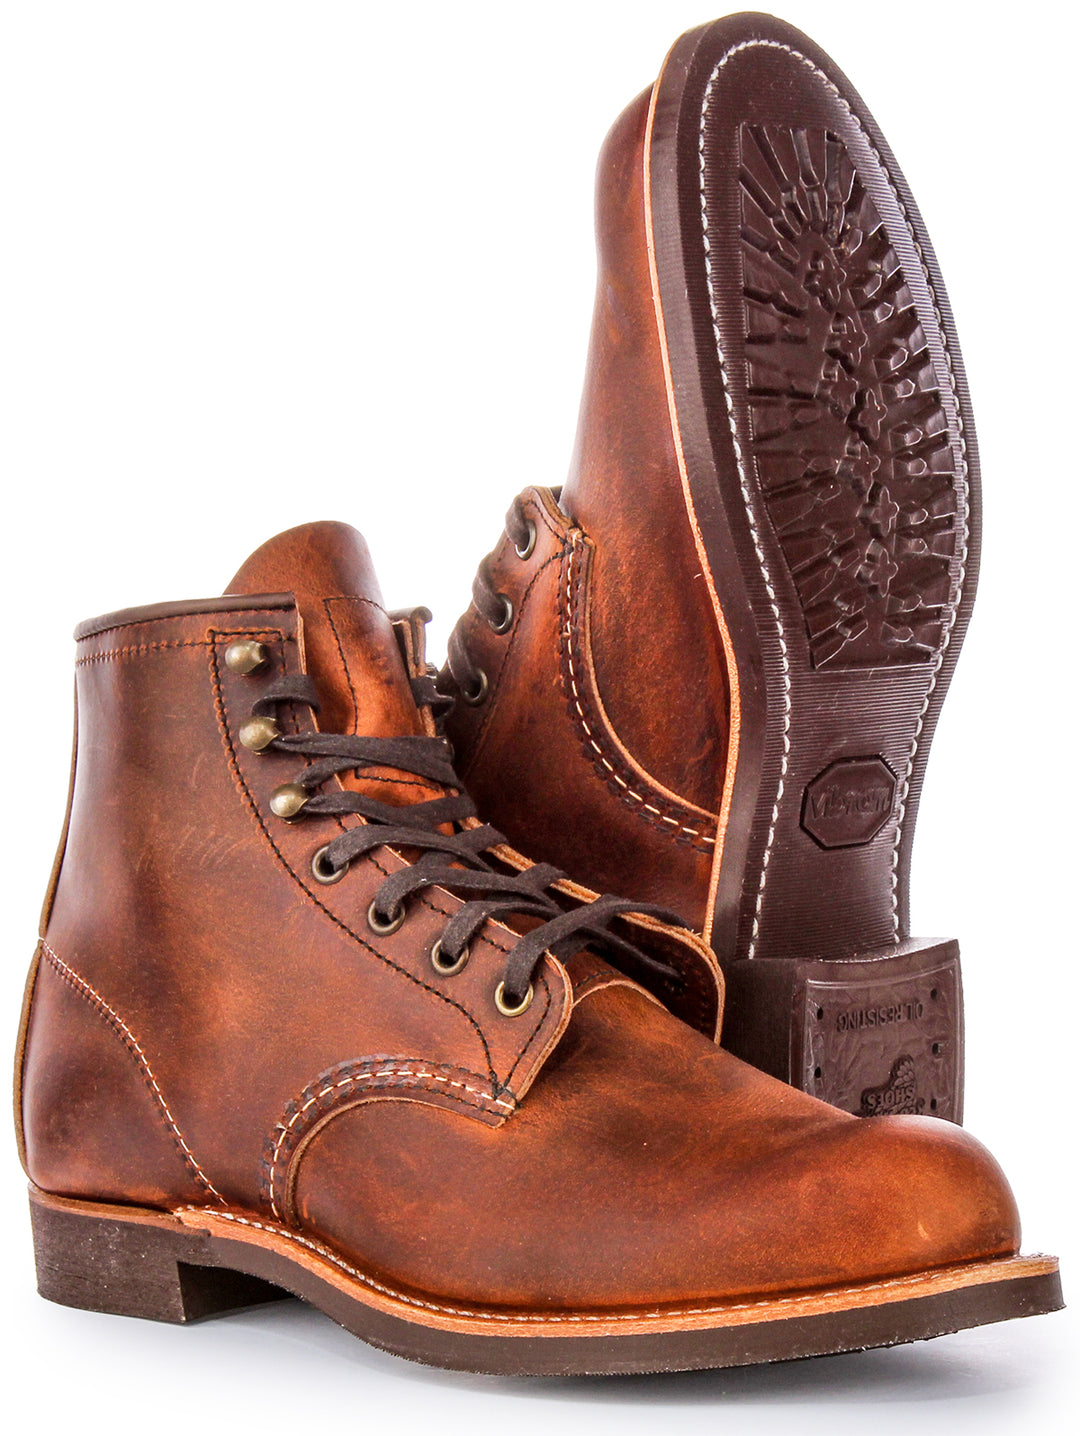 Red Wing 3343 In Copper For Men